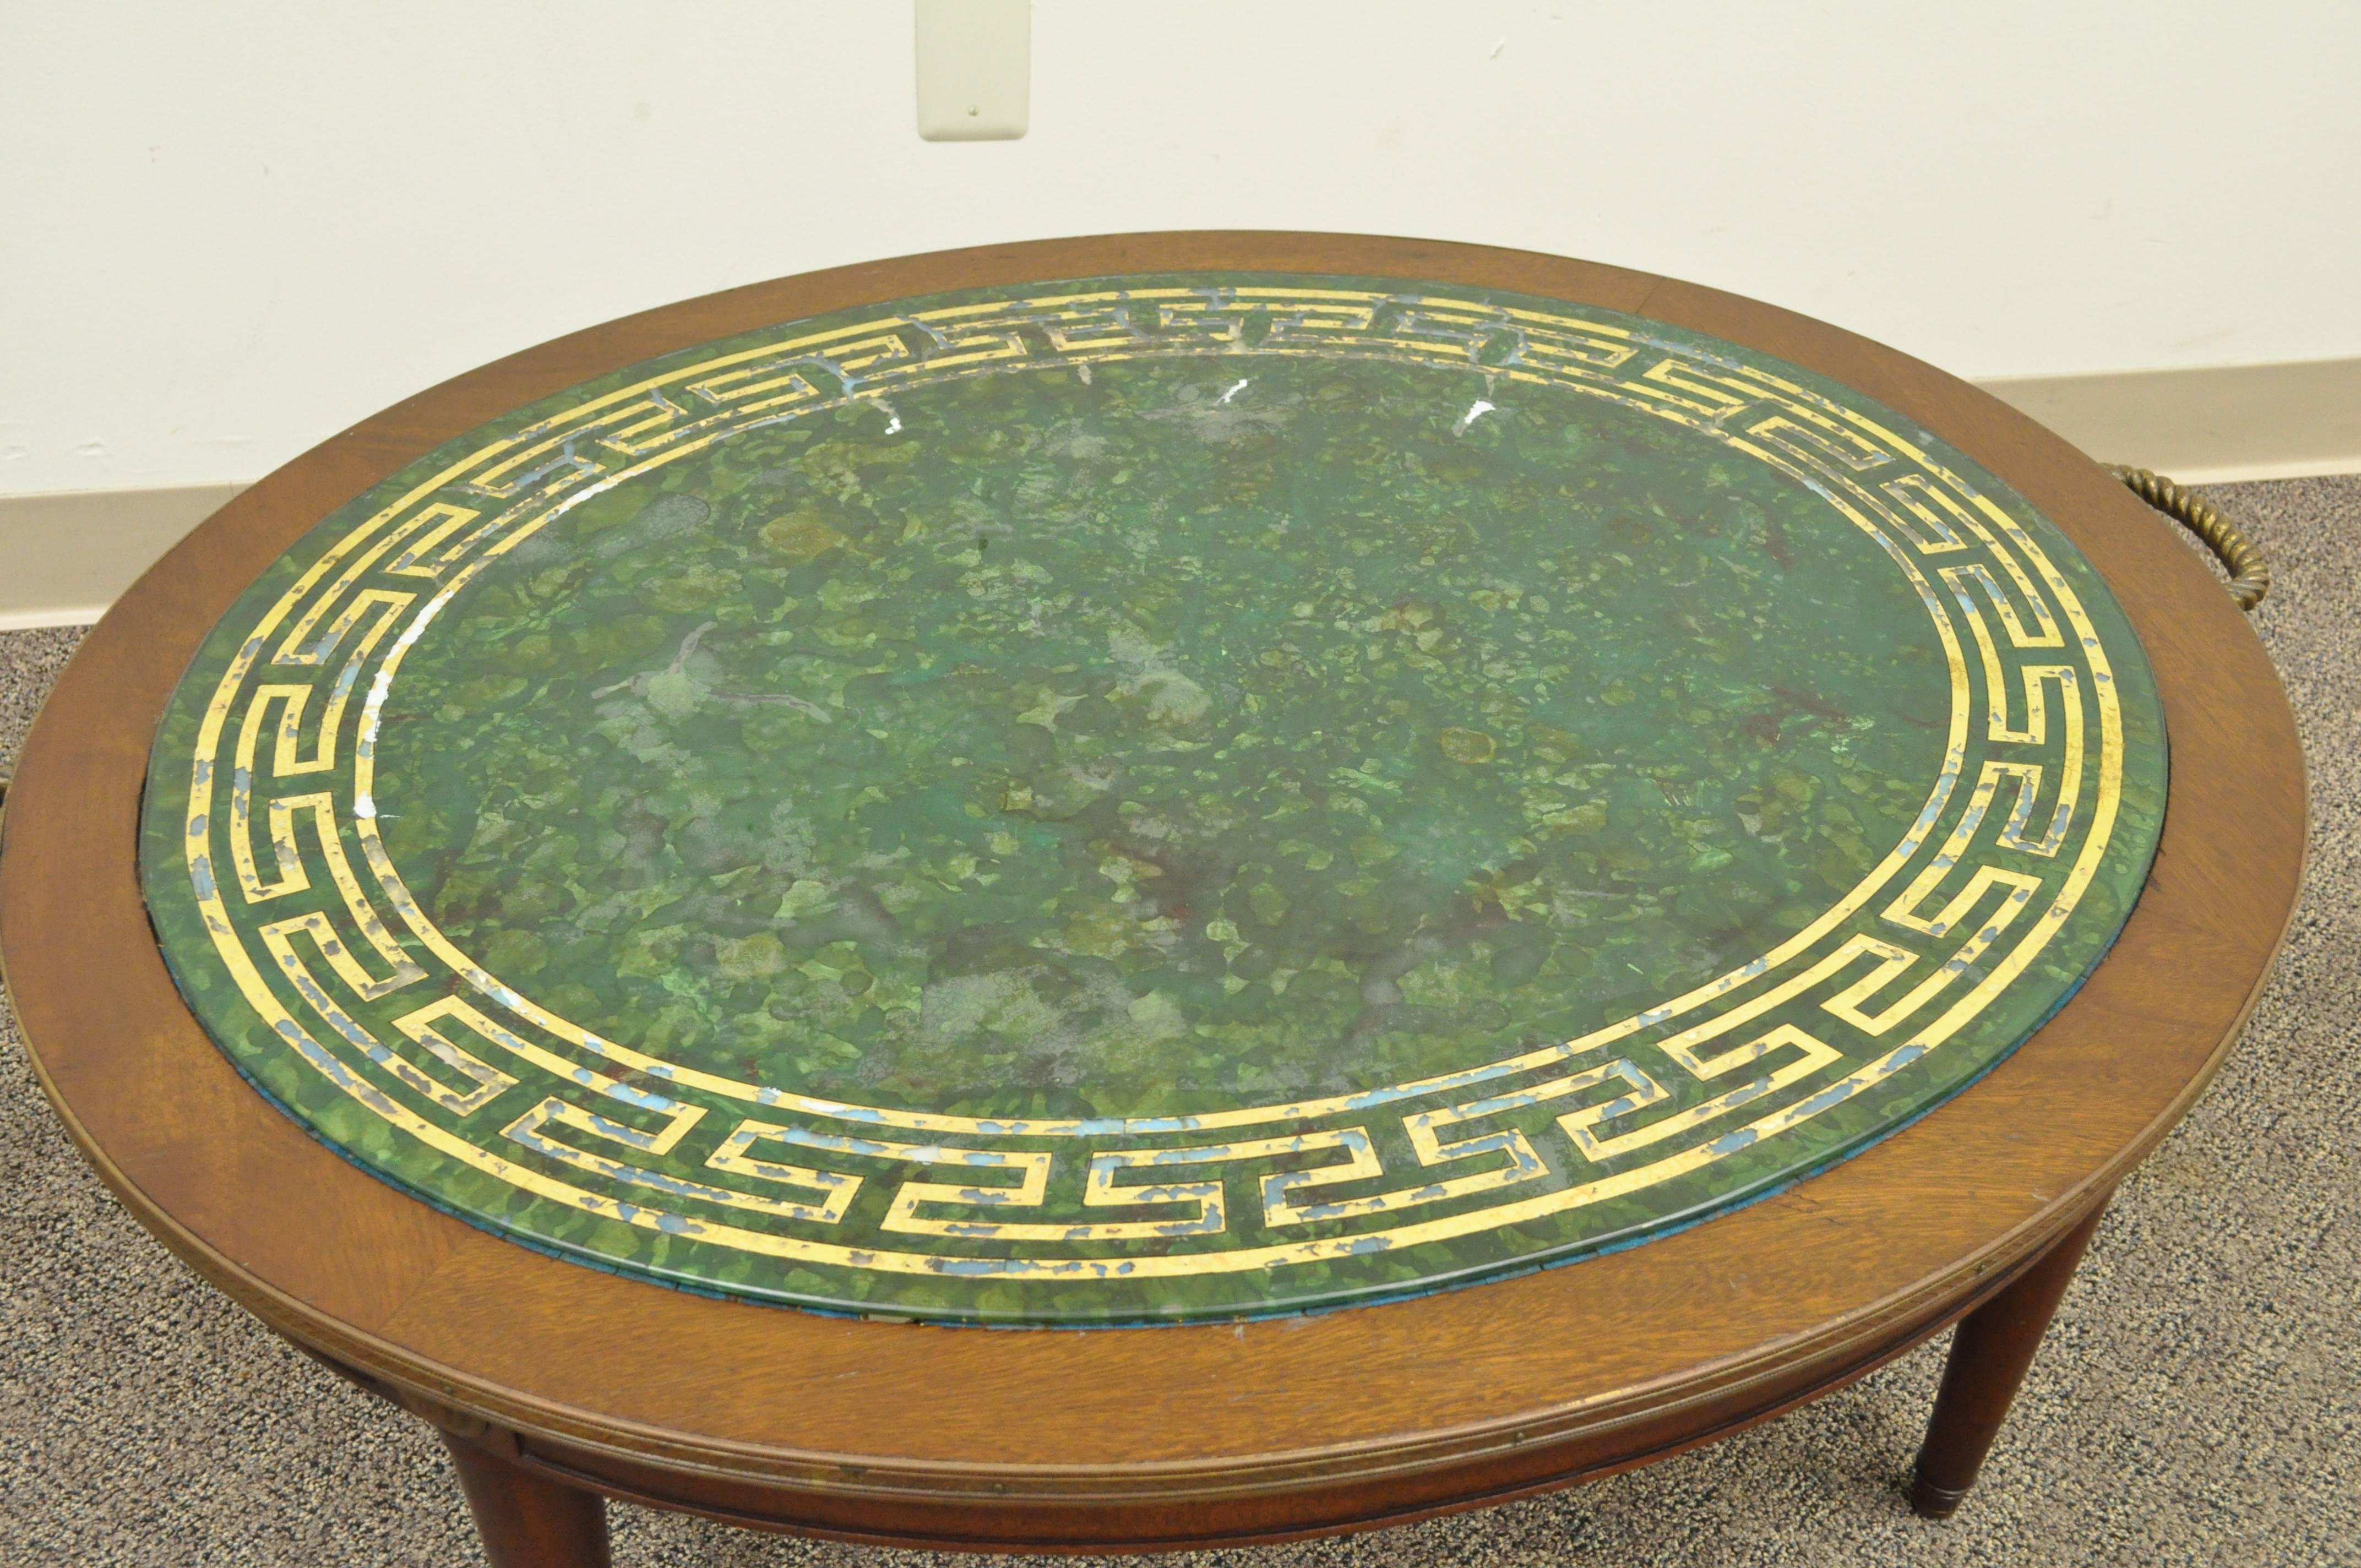 Unique vintage reverse decorated glass and mahogany oval coffee table with Greek key and faux malachite design to the top. Item features brass handles, decorative brass border and great neoclassical form.